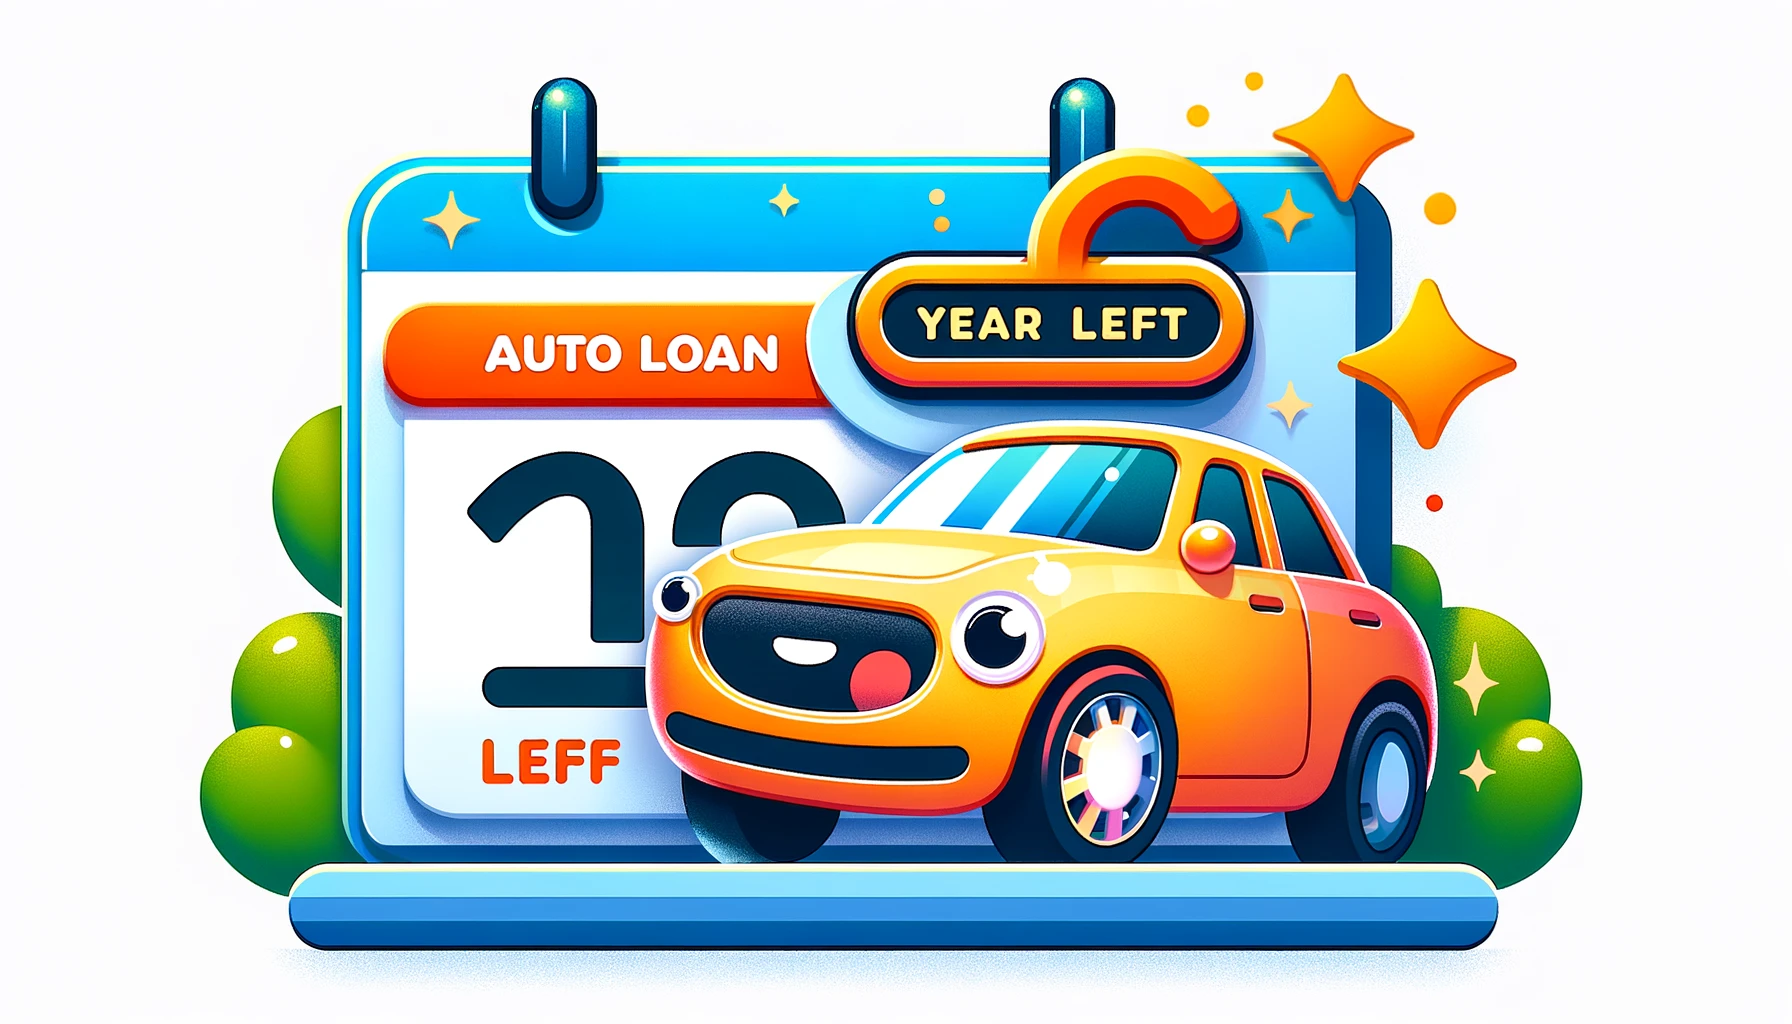 An auto loan with one year of payments left